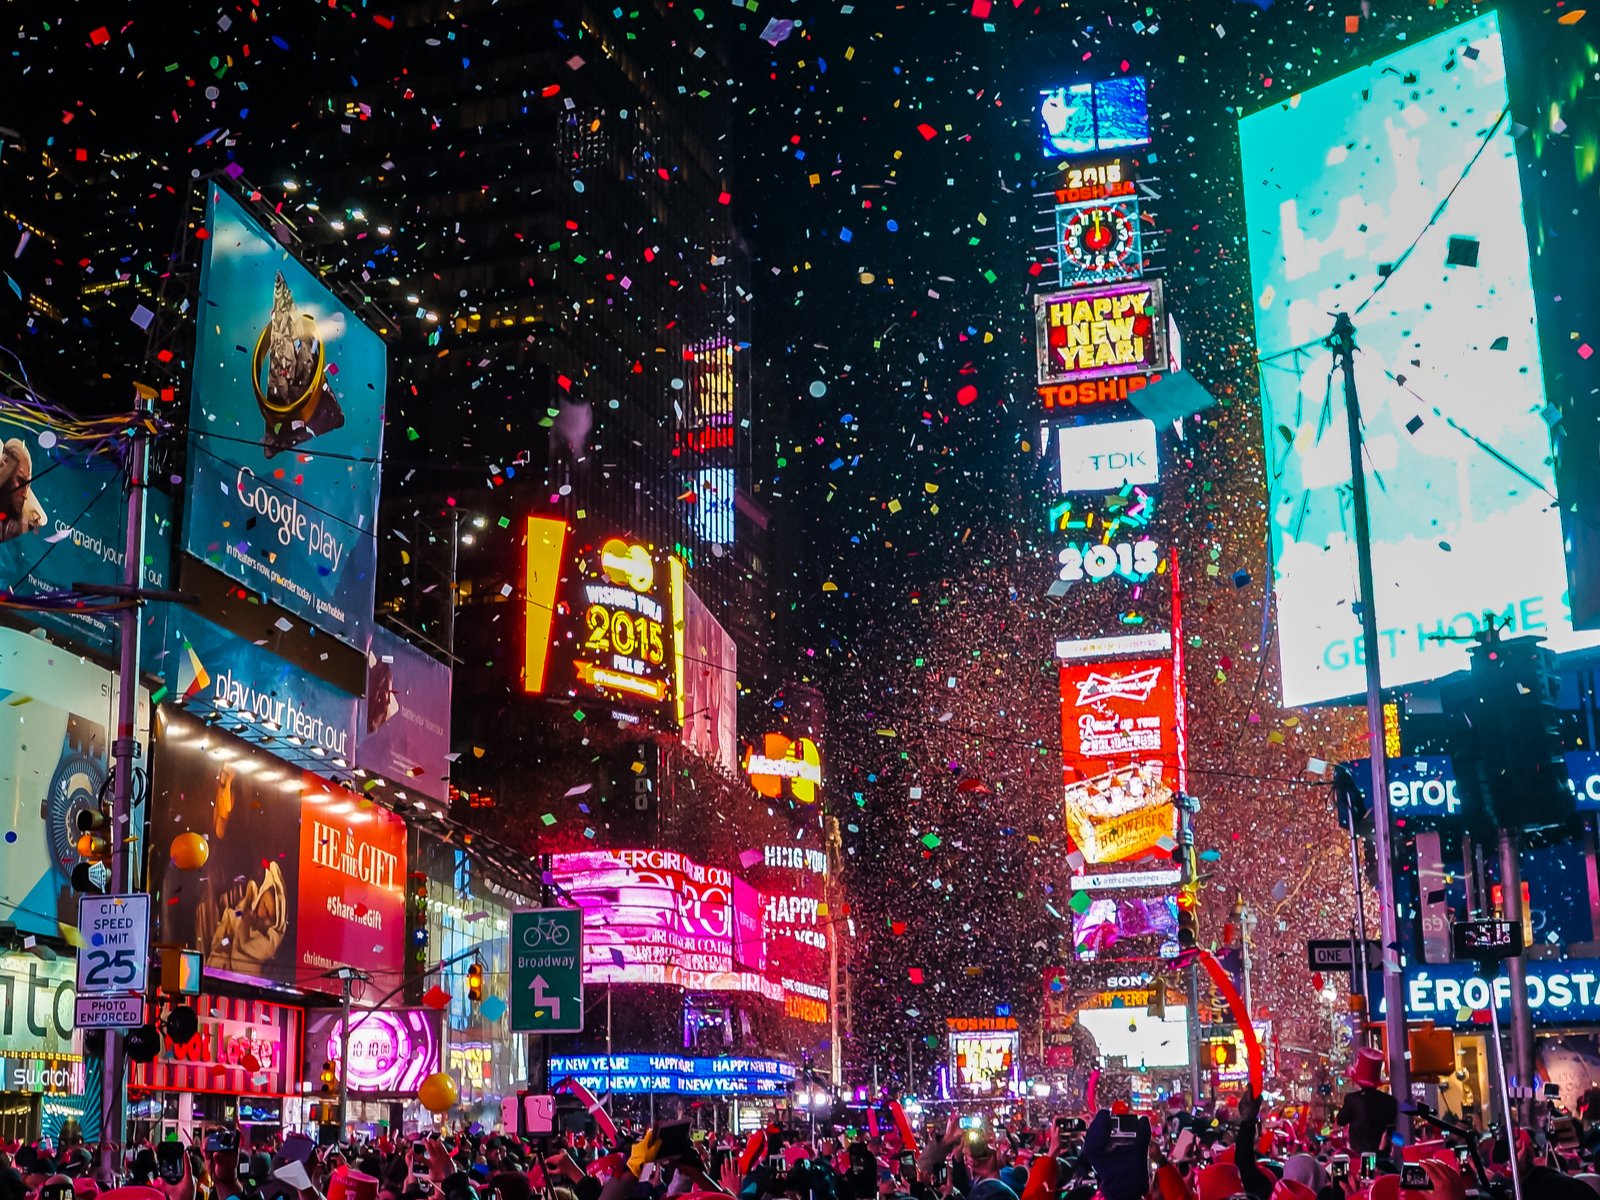 NYC will allow fully vaccinated people&nbsp;at New Year's Eve Celebration